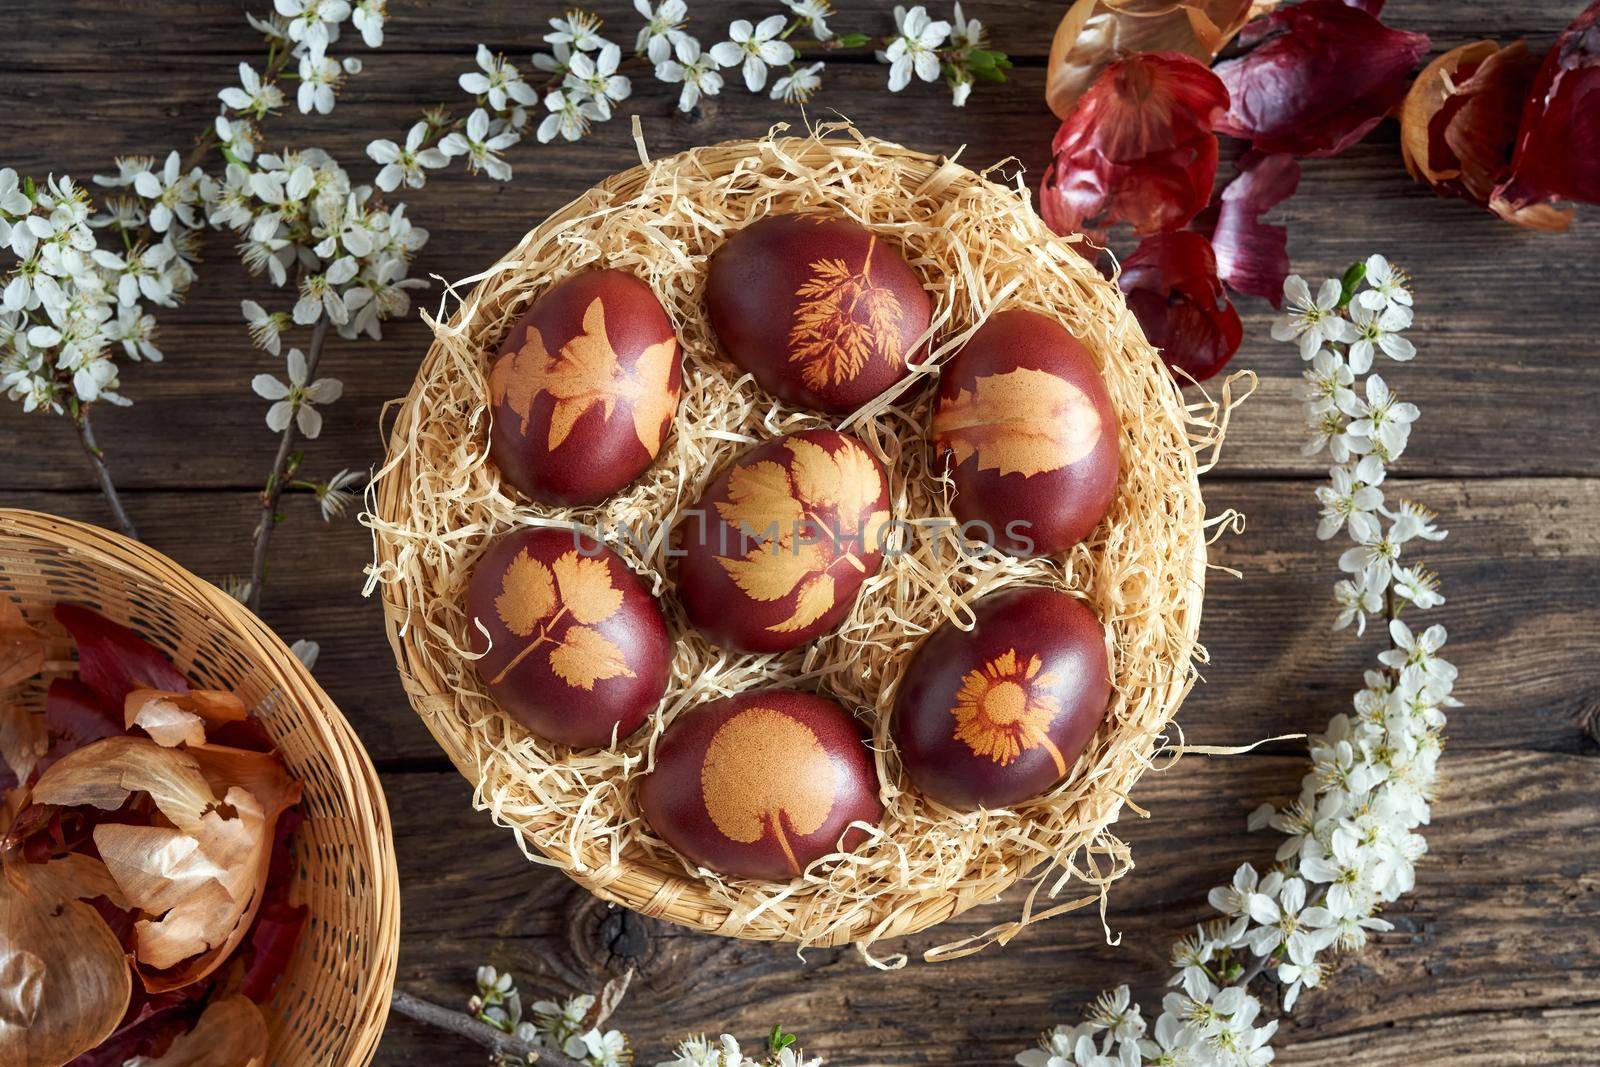 Easter eggs dyed with onion peels in a basket with spring flowers by madeleine_steinbach